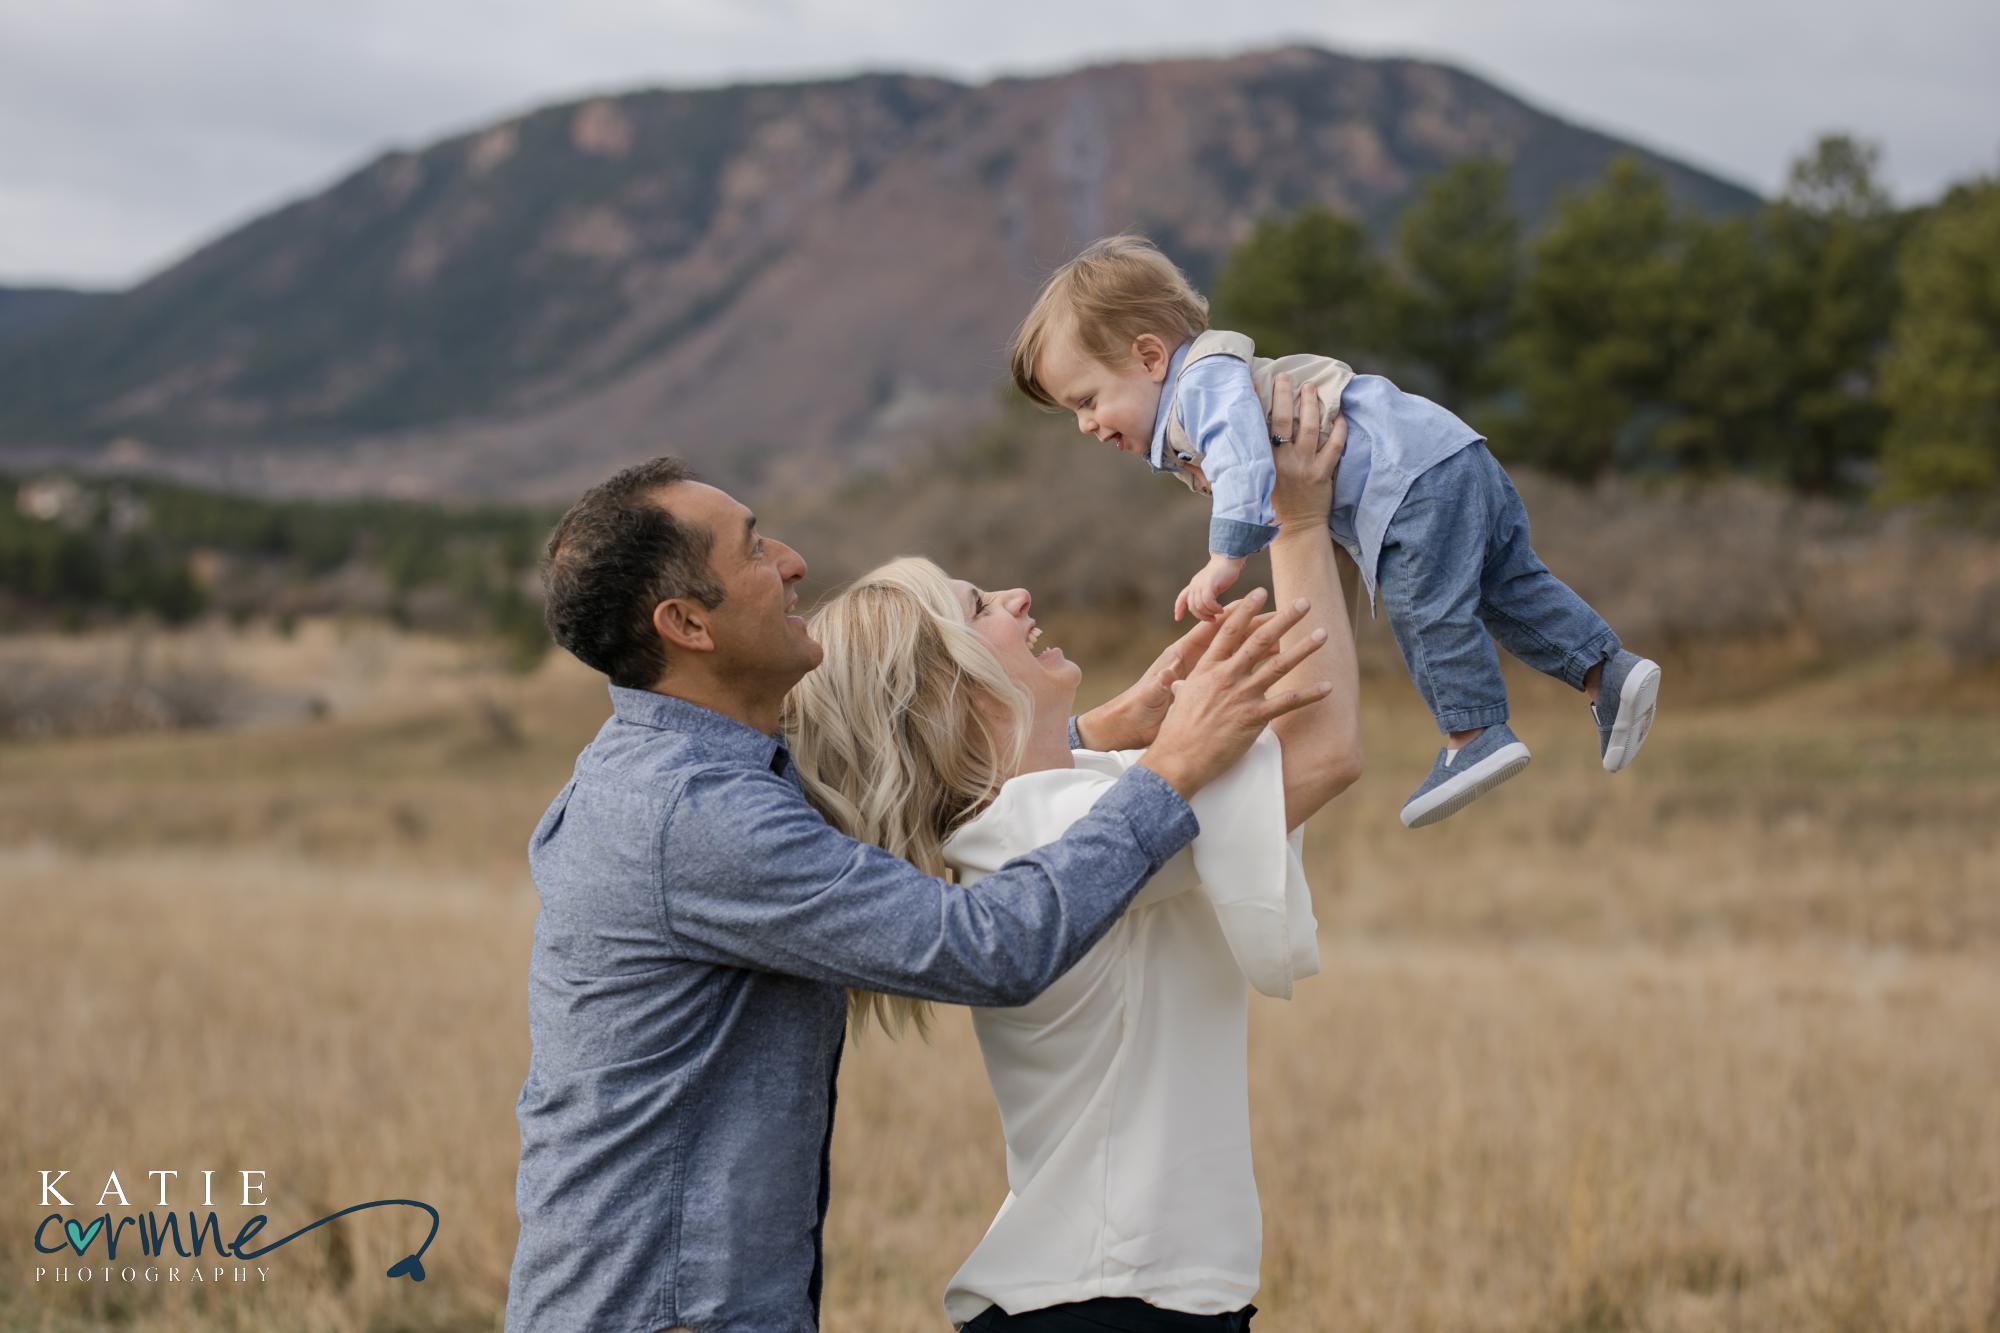 Palmer Lake parents play with one year old in front of Colorado landscape